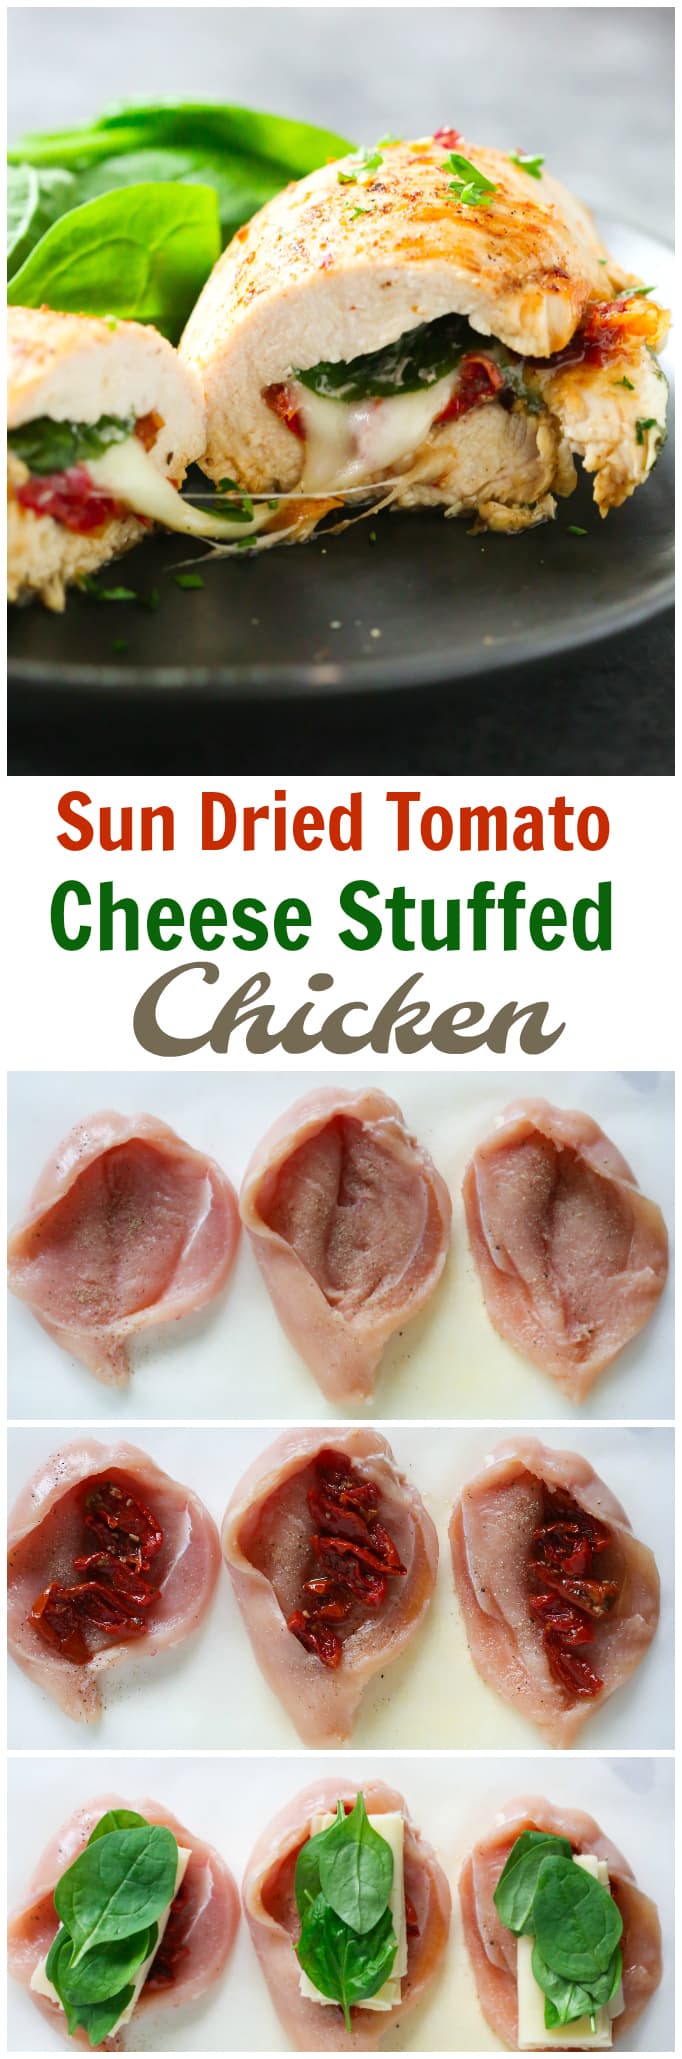 Try this Sun Dried Tomato, Spinach and Cheese Stuffed Chicken recipe and you’ll never say again that chicken breast recipes are not very flavourful.